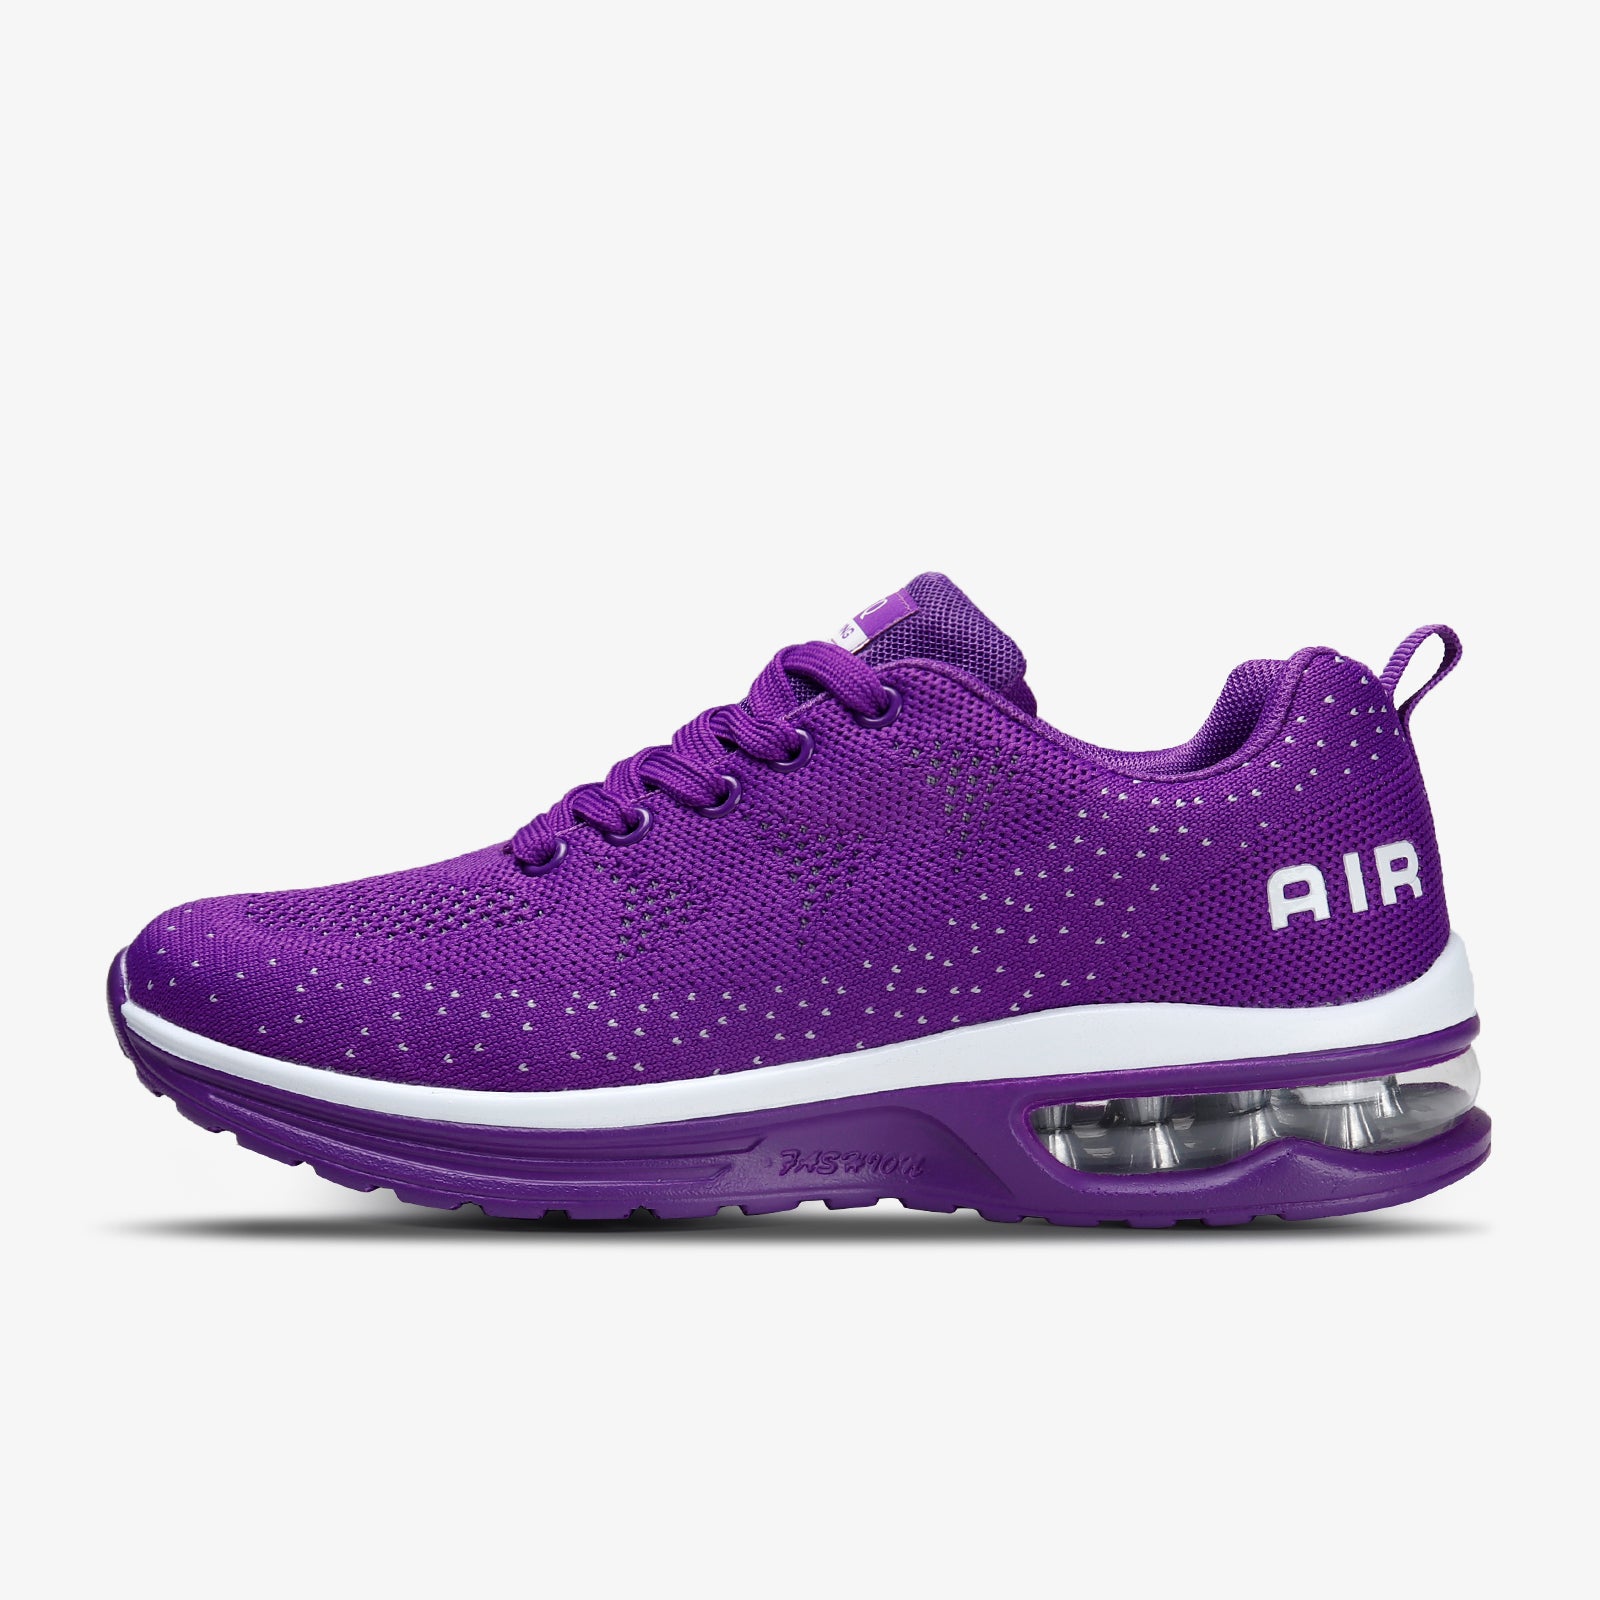 running shoes with air cushion